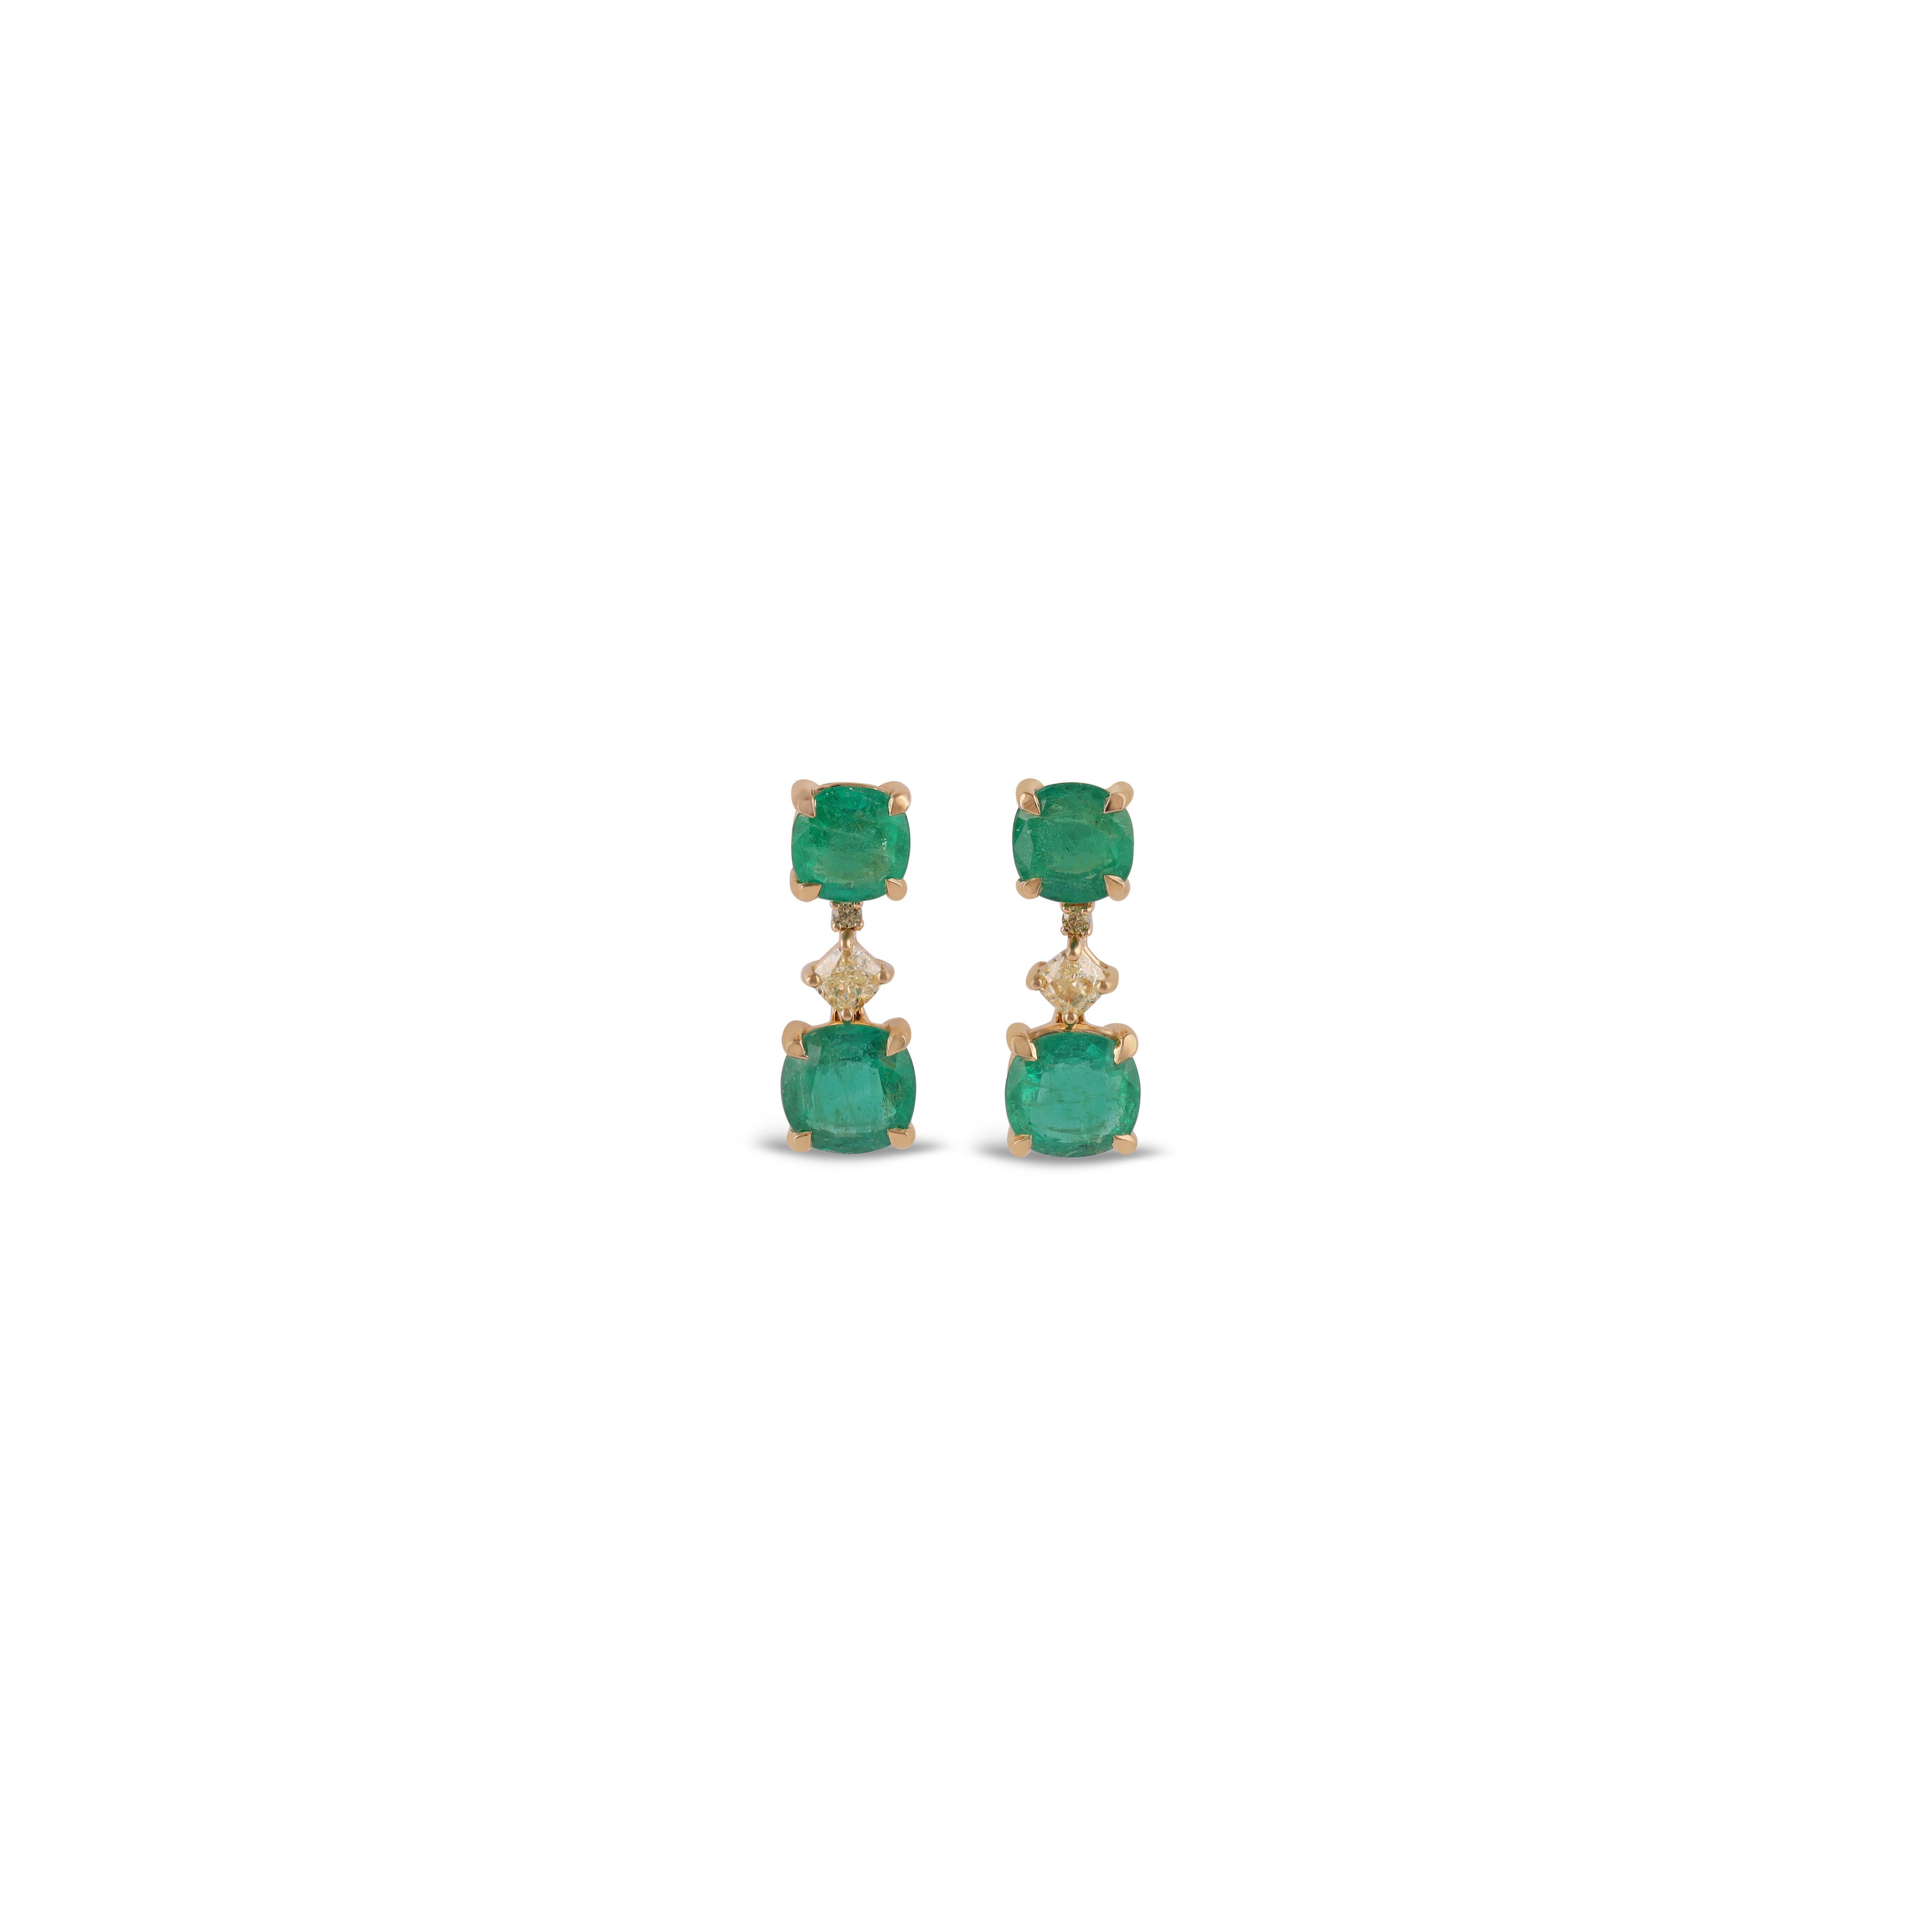 This is an elegant emerald & diamond Earring studded in 18k Yellow gold with 4 piece of  Zambian emerald weight 3.62 carat With 4 pieces of  fancy Color diamonds weight 0.41 carat, this entire Earring studded in 18k Yellow gold


 its a classic